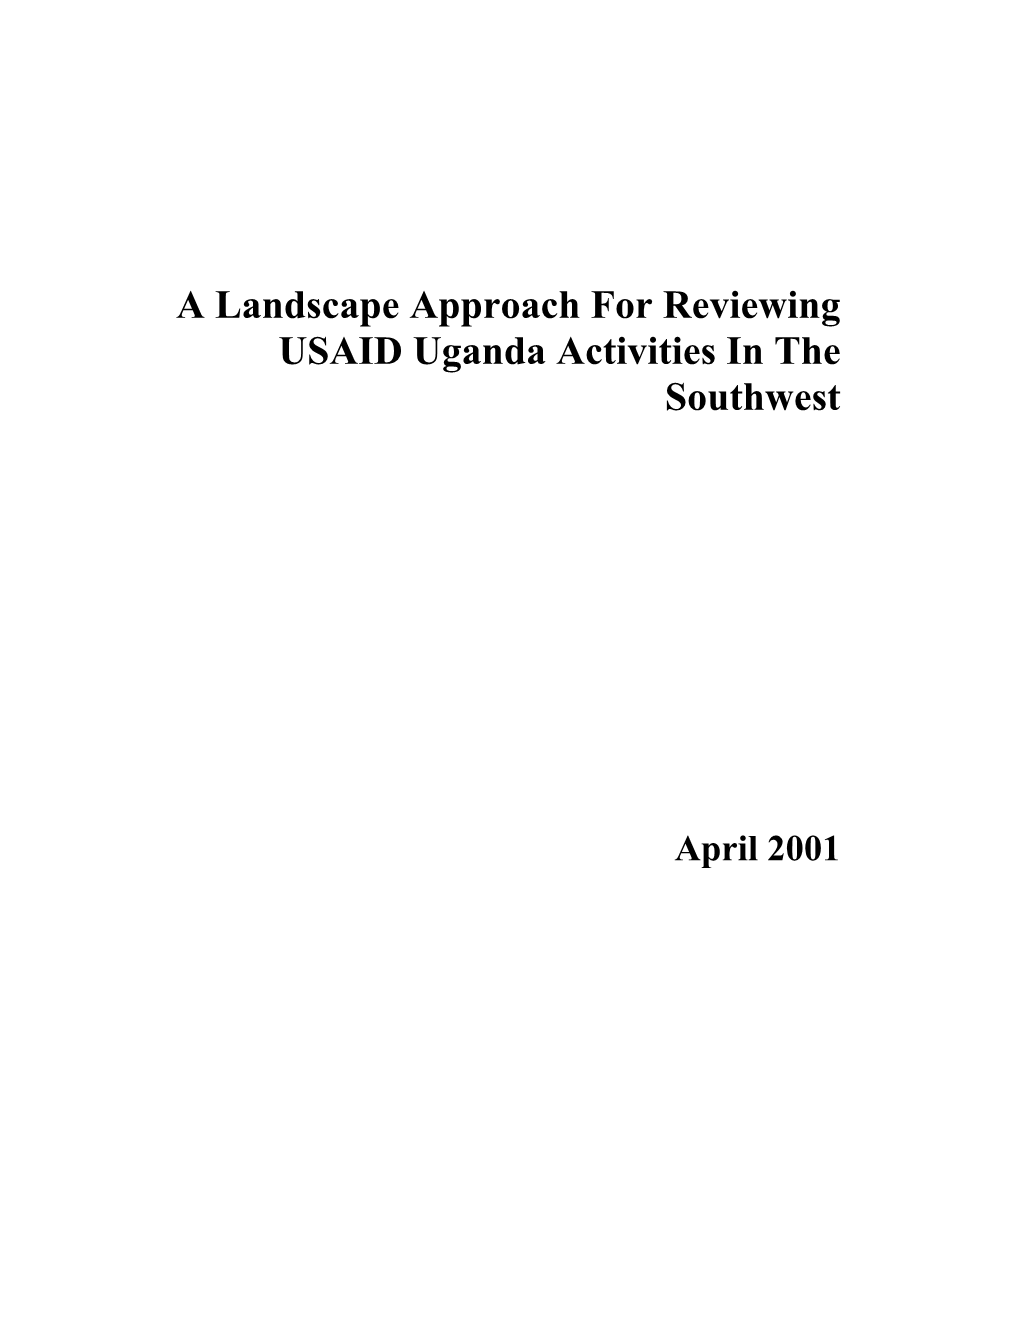 A Landscape Approach for Reviewing USAID Uganda Activities in the Southwest